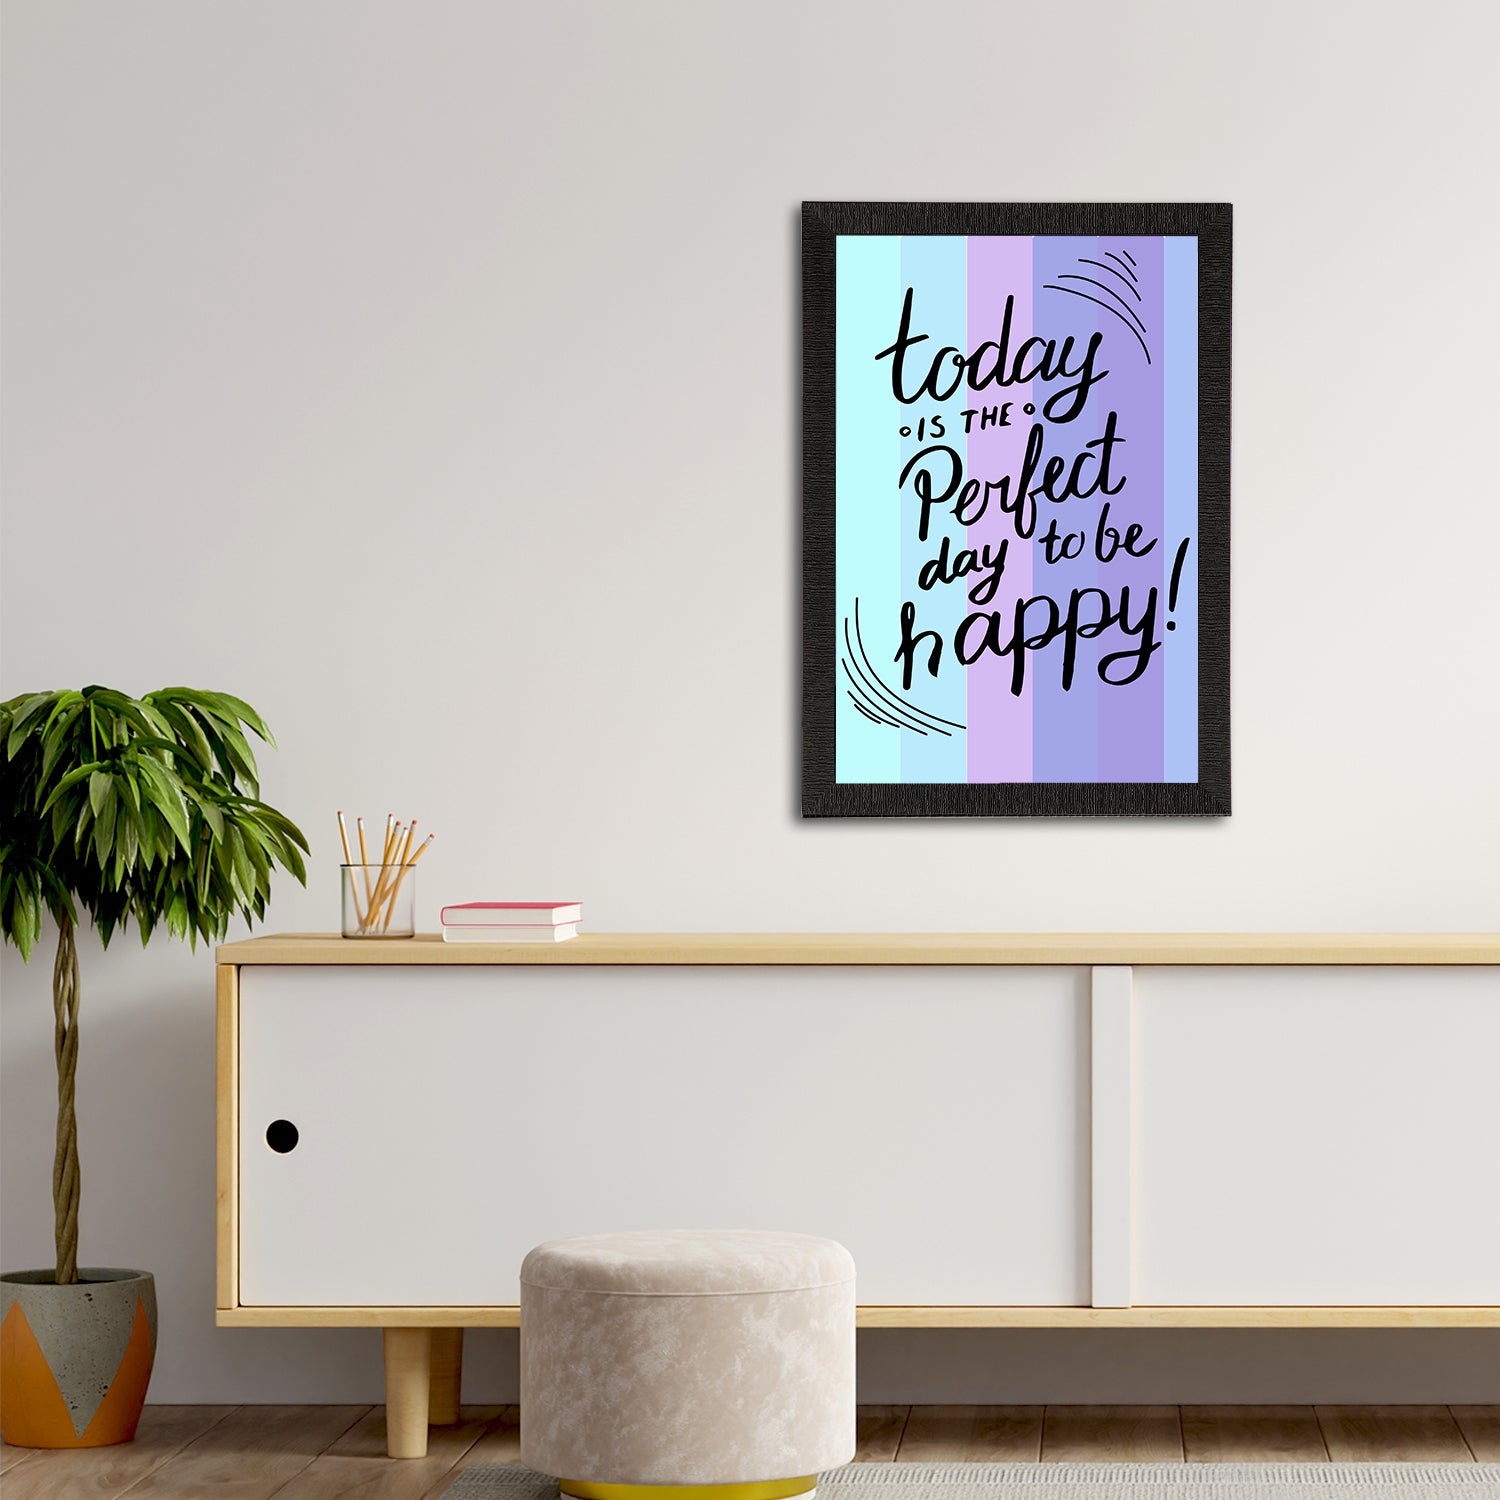 "Today Is The Perfect Day To Be Happy" Motivational Quote Satin Matt Texture UV Art Painting 2